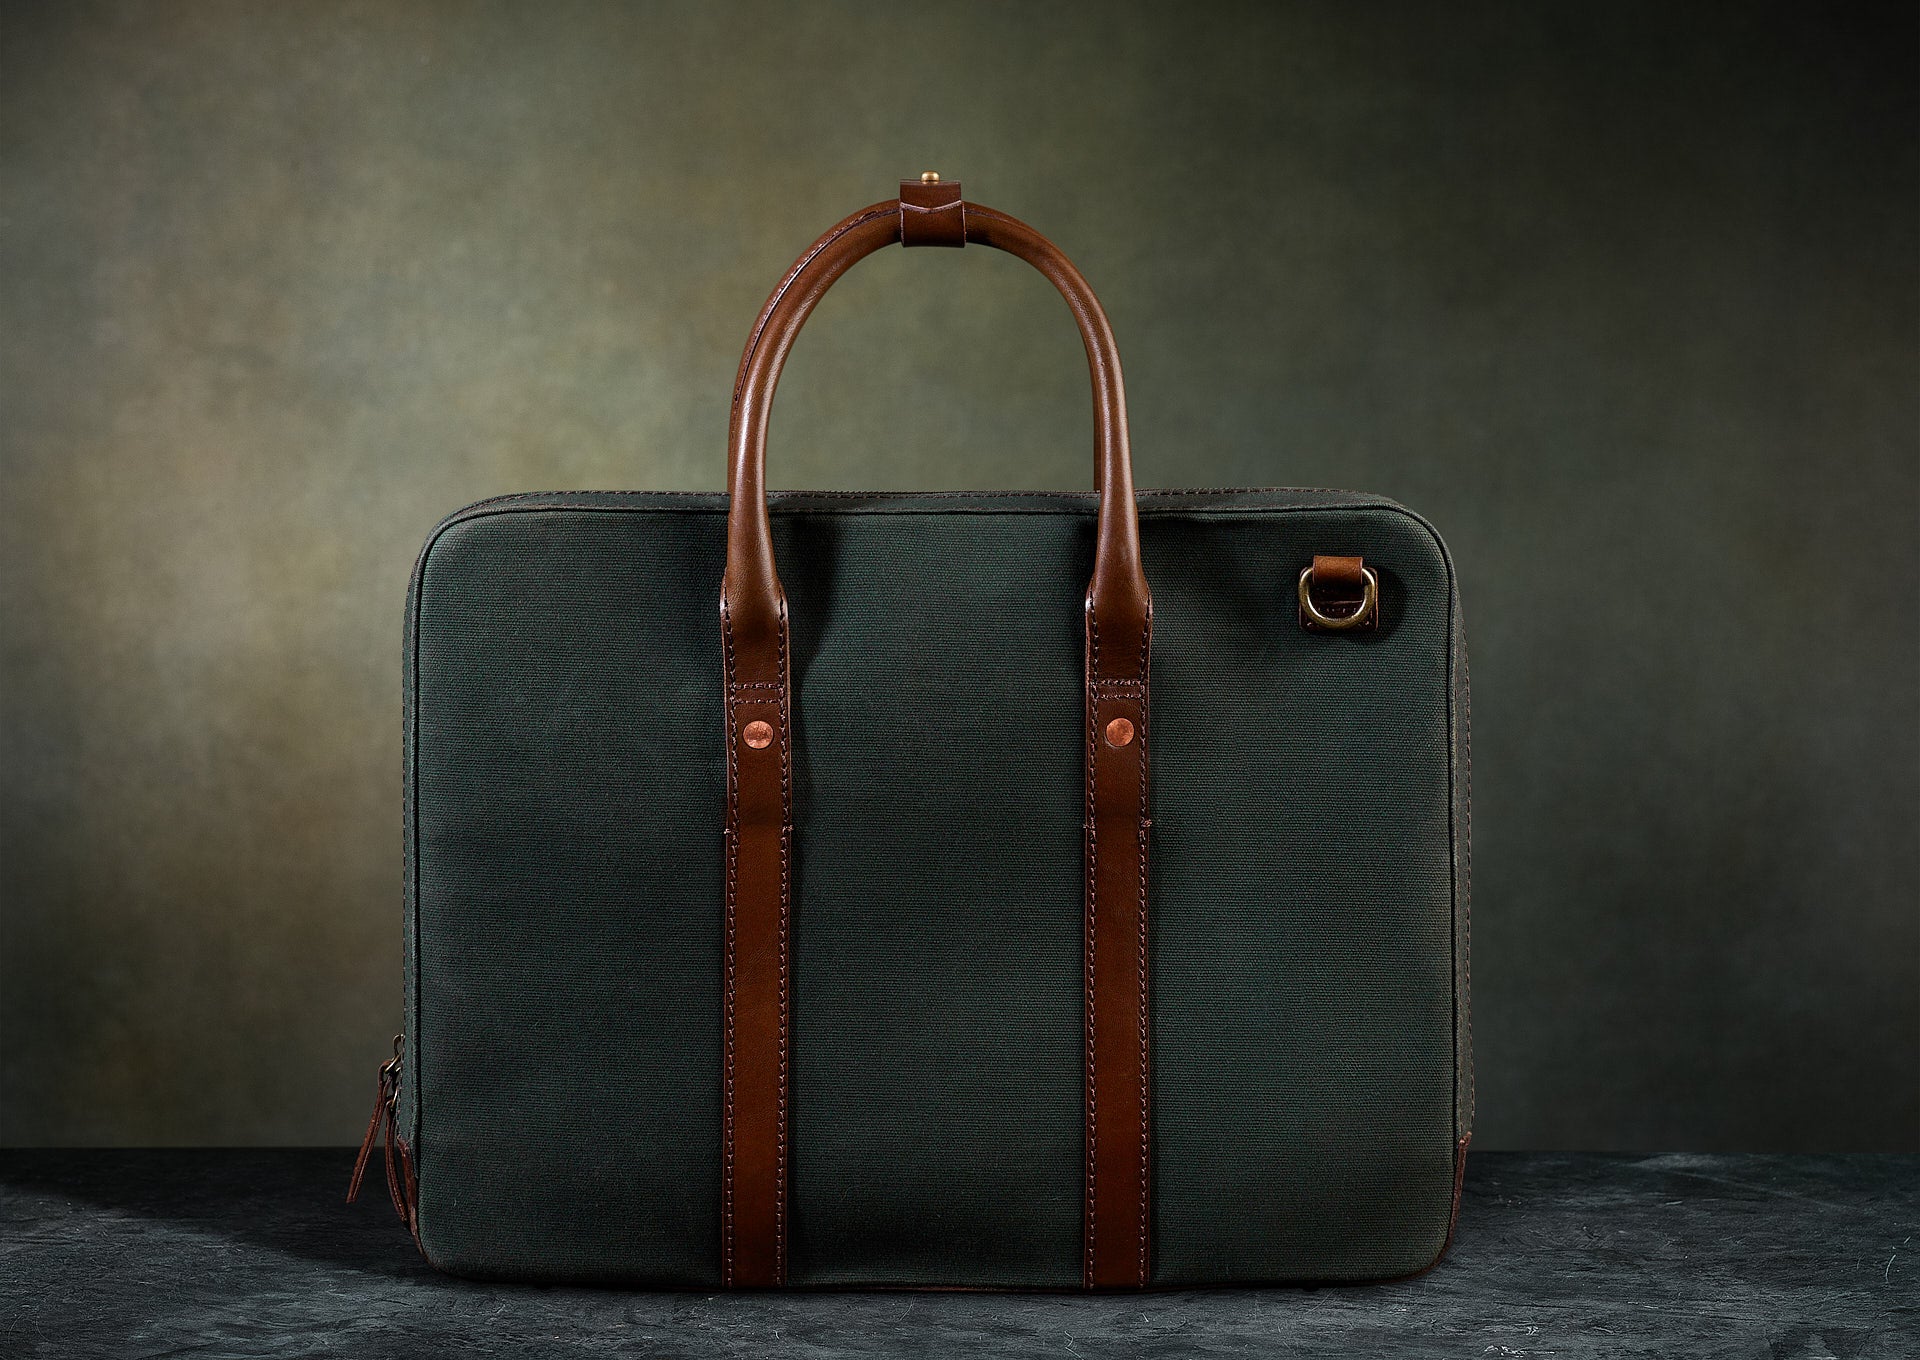 Bennett Winch Canvas Briefcase Olive at CareOfCarl.com